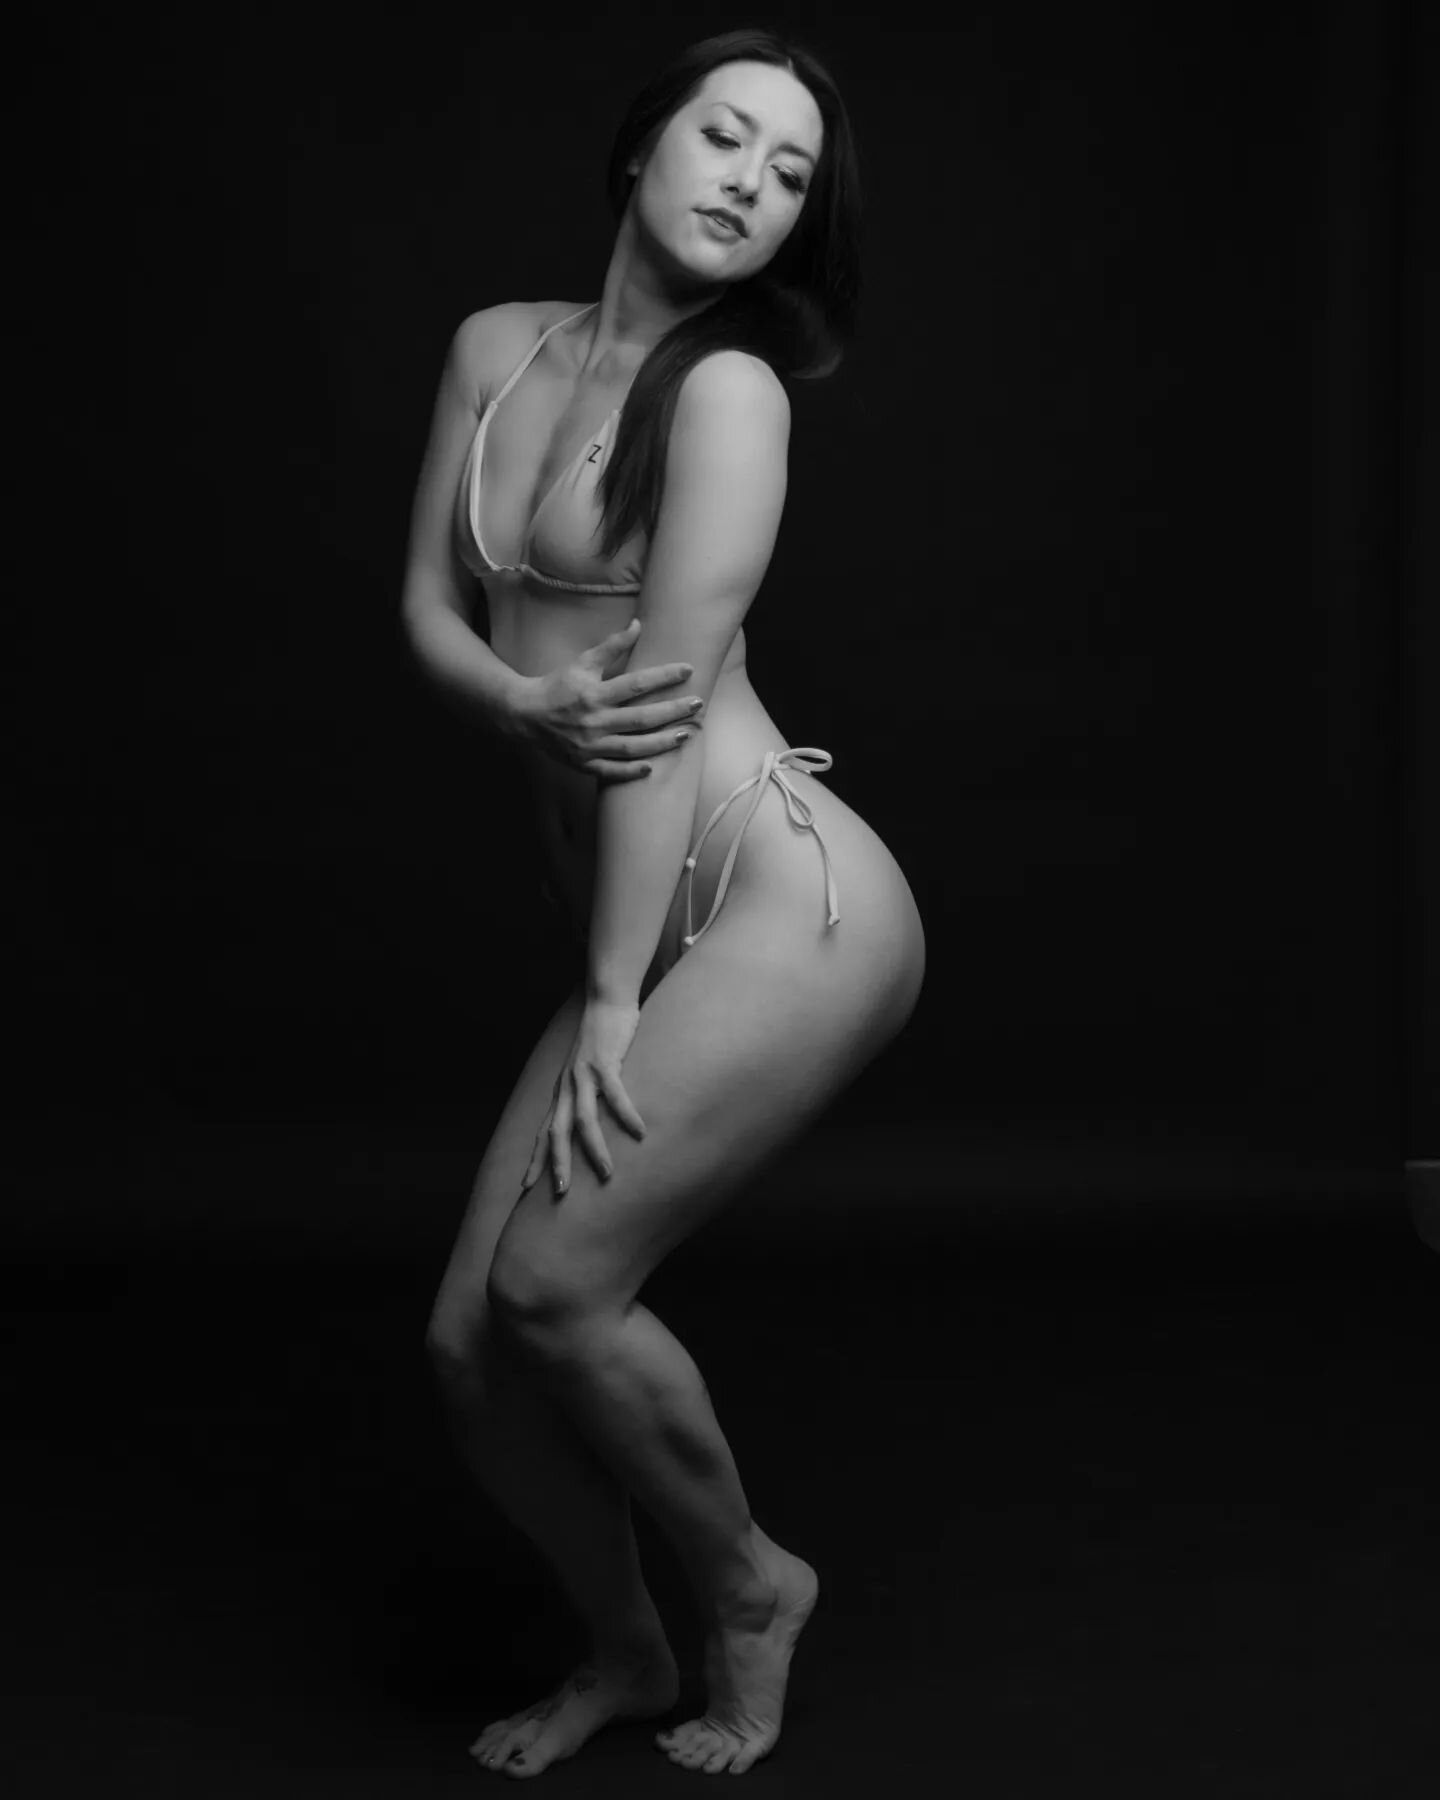 Experimenting with black and white. Thank you @isabellovemodel for your infinite patience while I try new ideas!

And thank you to everyone who shares and supports my work!